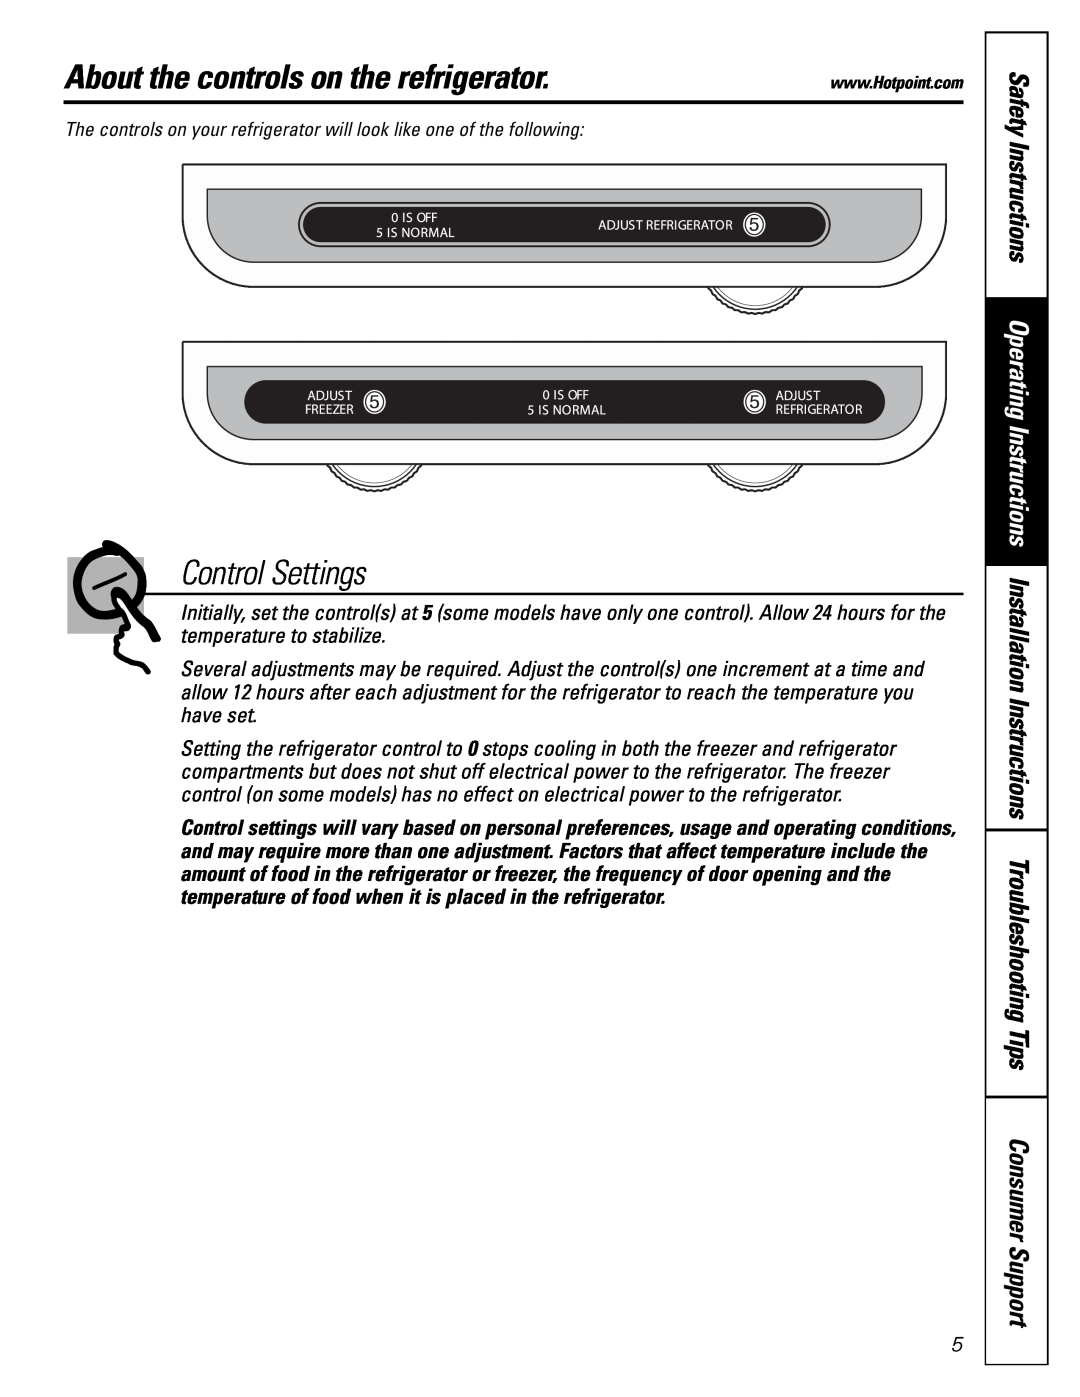 Hotpoint 19 installation instructions About the controls on the refrigerator, Control Settings 